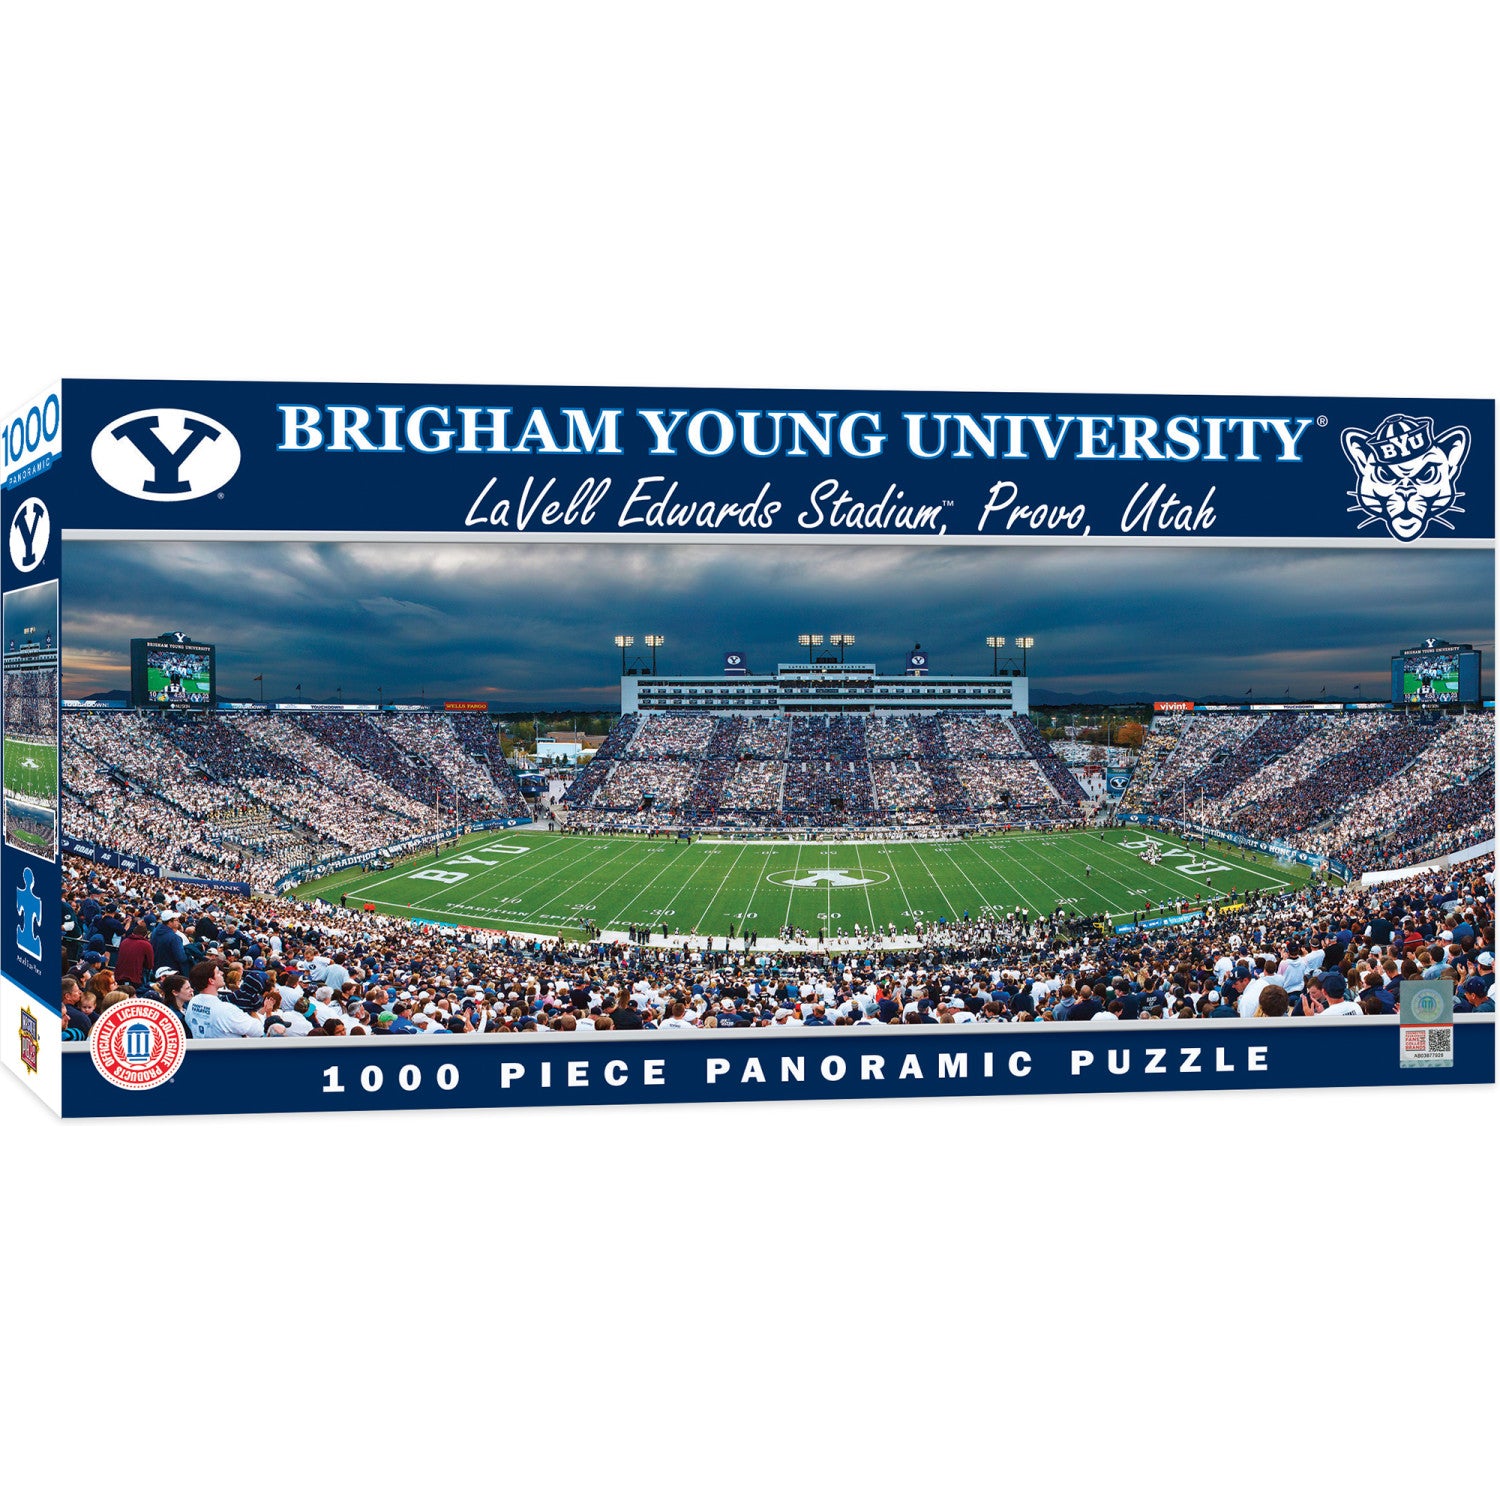 BYU Cougars - 1000 Piece Panoramic Jigsaw Puzzle